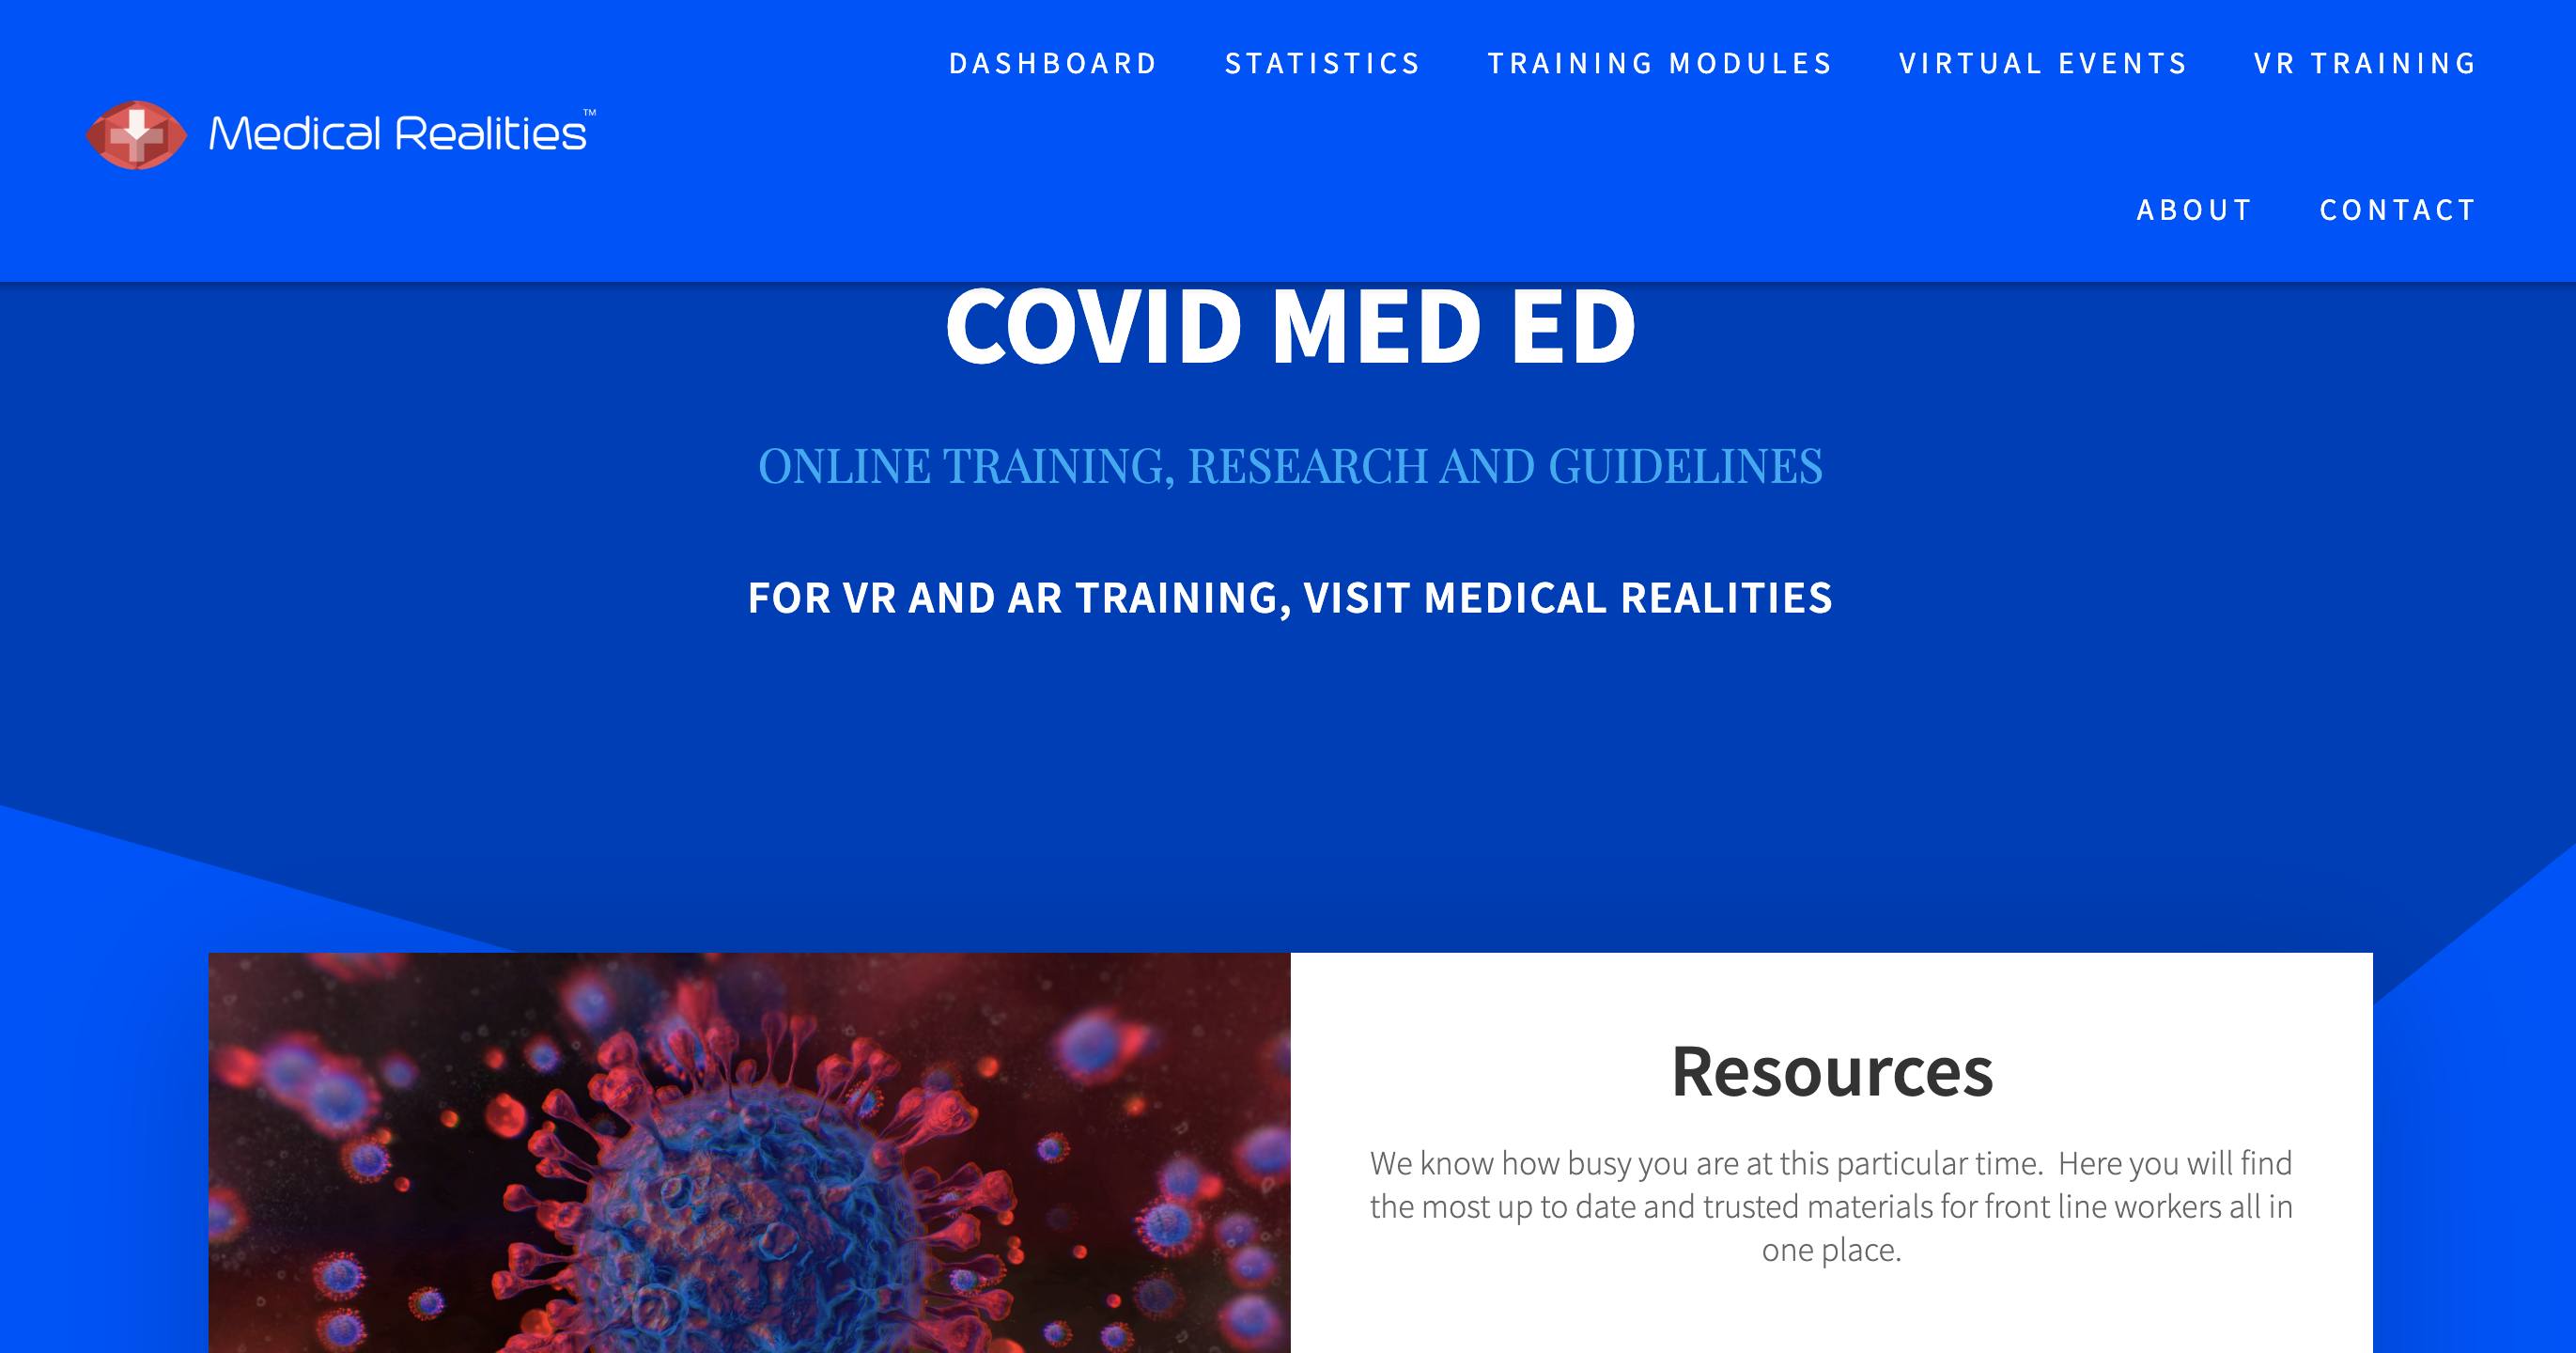 Covid-19 Resources for Doctors featured image